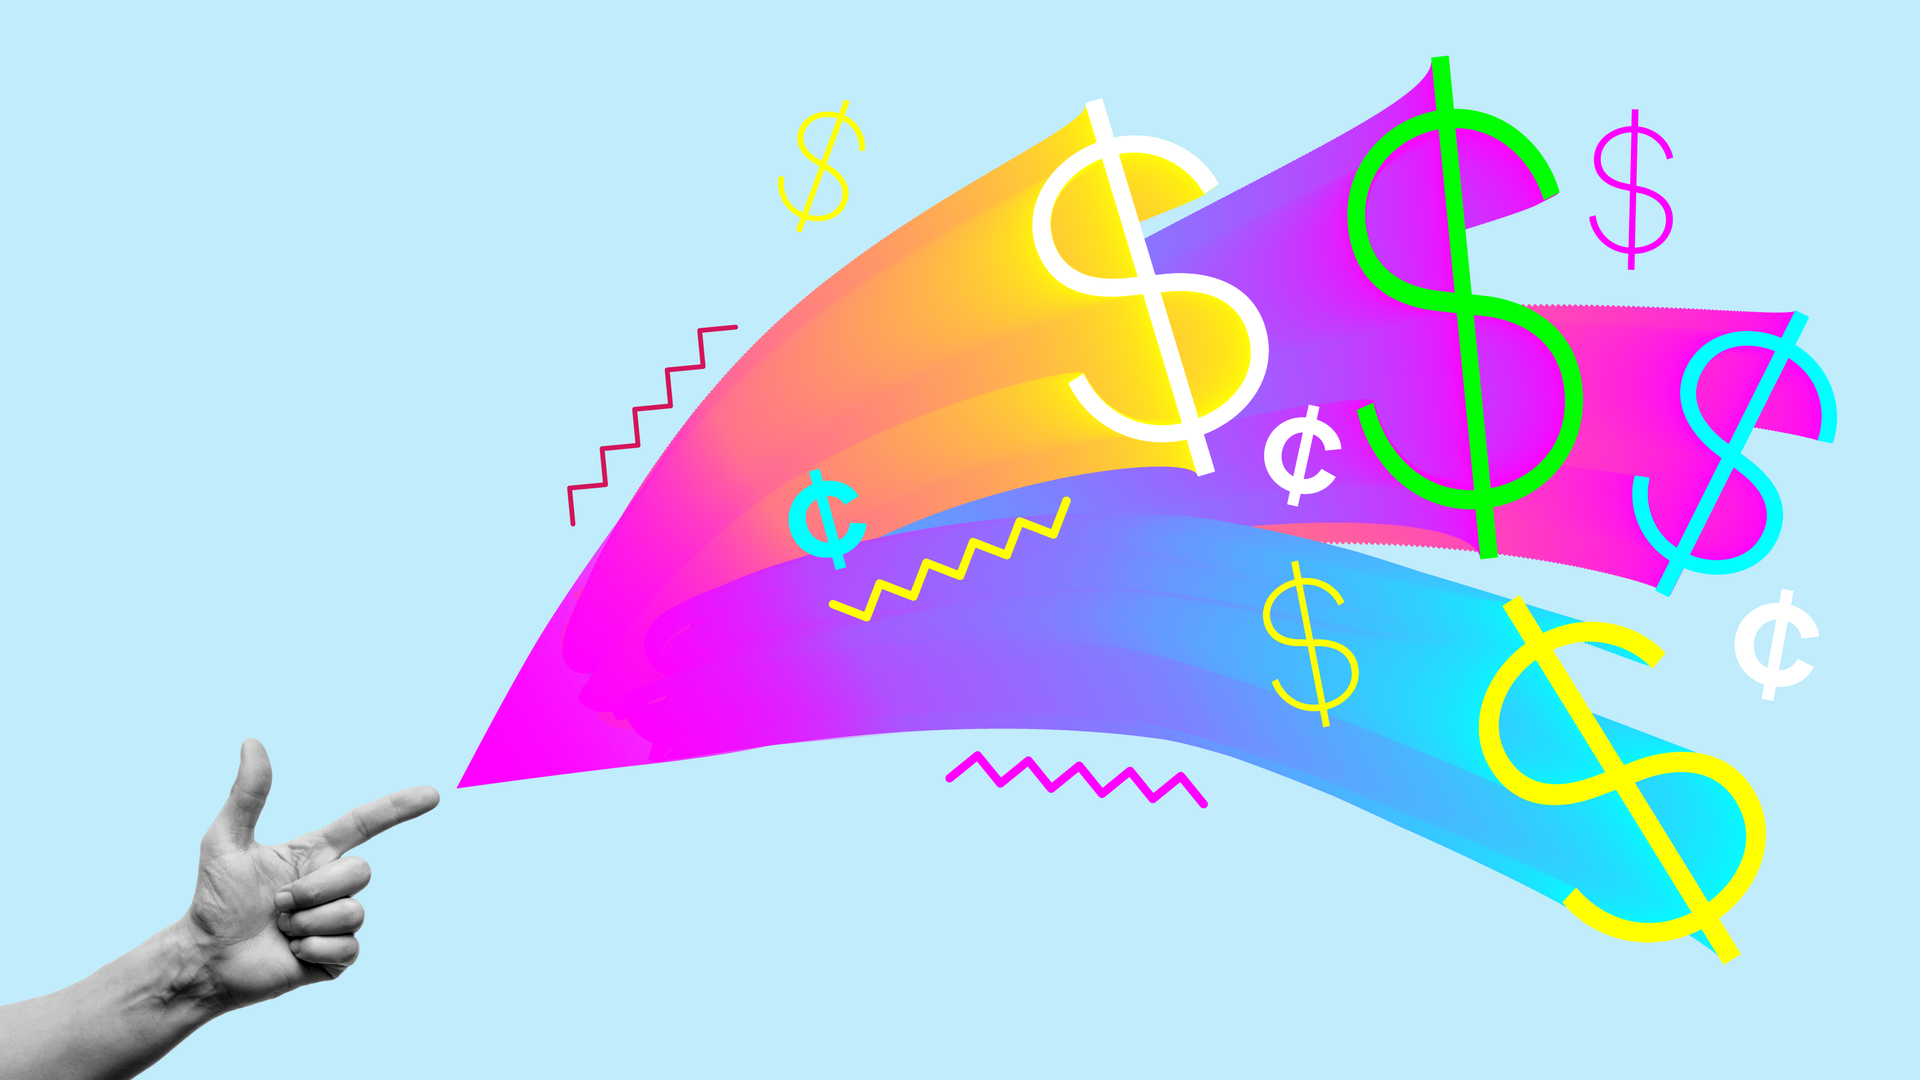 Illustration of money signs shooting out of a hand to symbolize venture capital.